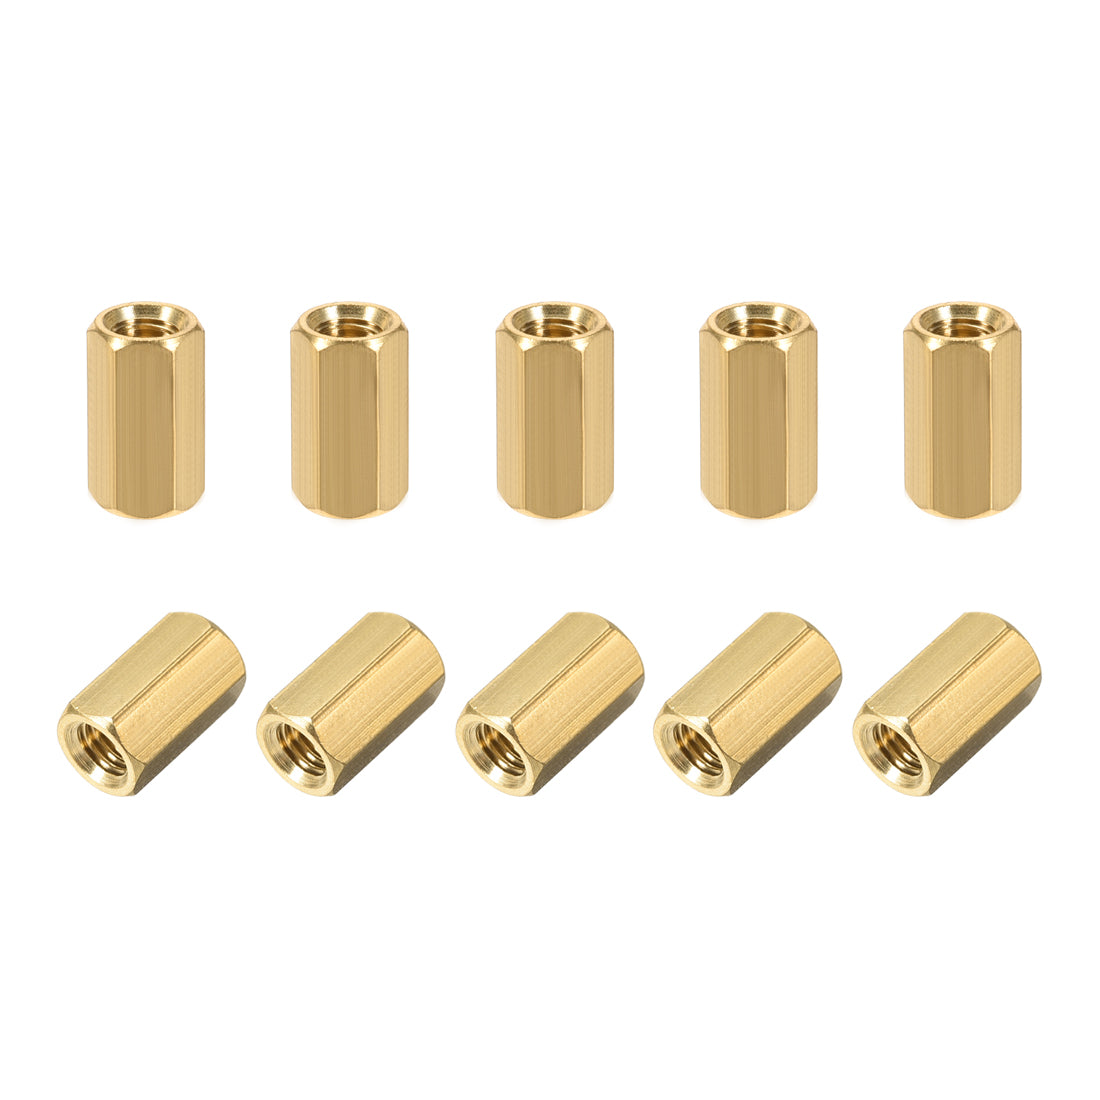 Uxcell Uxcell M5 x 20 mm Female to Female Hex Brass Spacer Standoff 10pcs